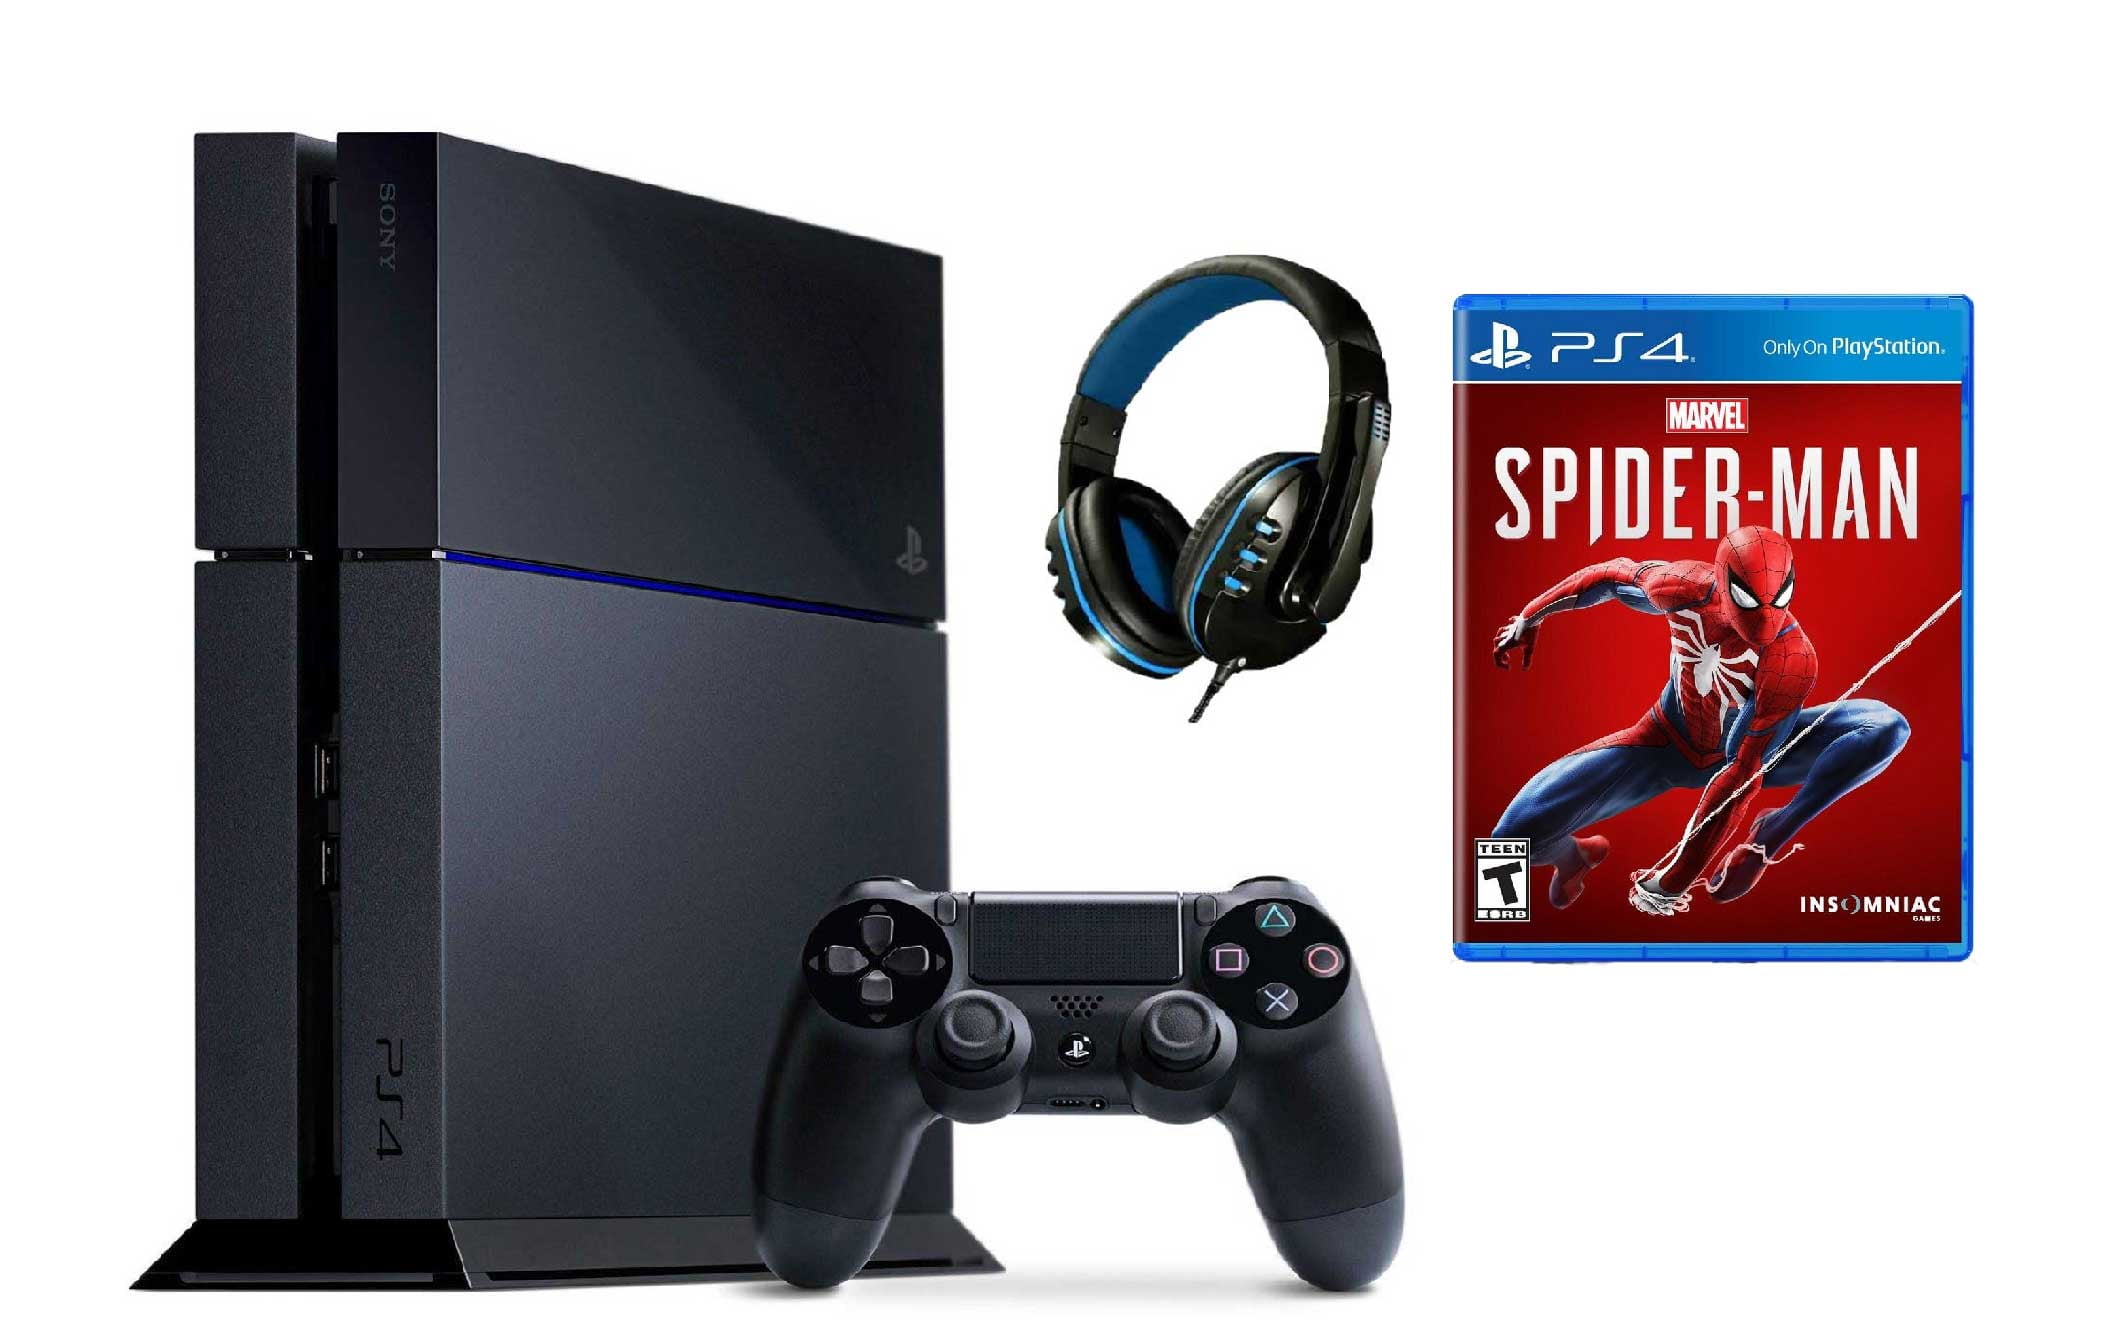 Consola Sony PS4 1TB + Ratchet & Clank + Uncharted 4 + The Last of Us -  Consola - Compra na